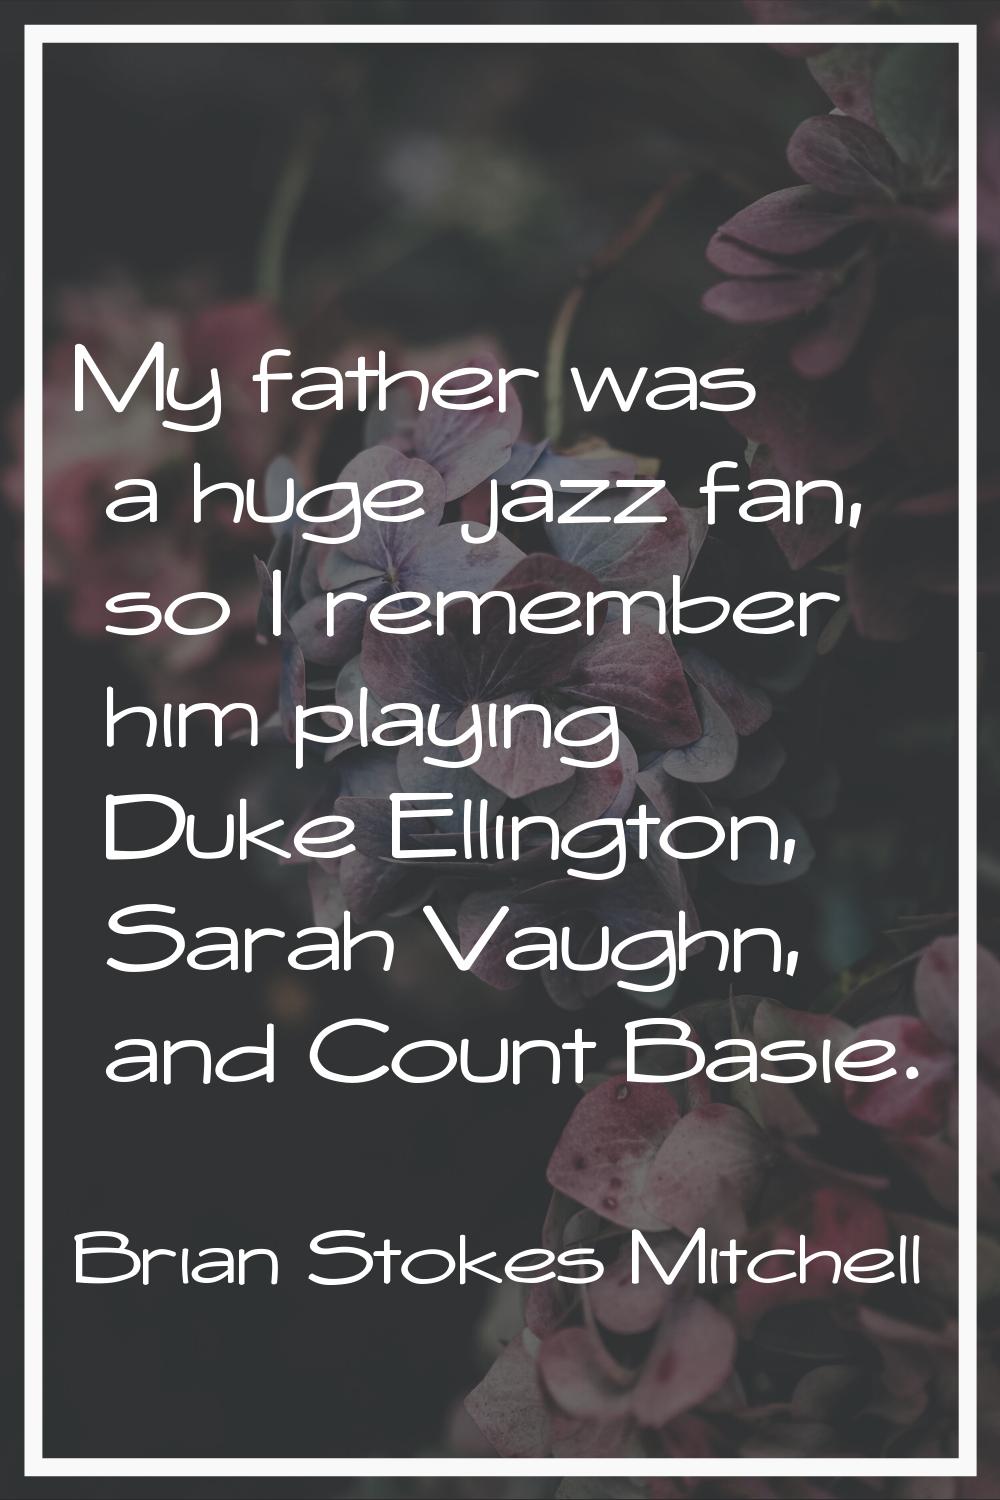 My father was a huge jazz fan, so I remember him playing Duke Ellington, Sarah Vaughn, and Count Ba